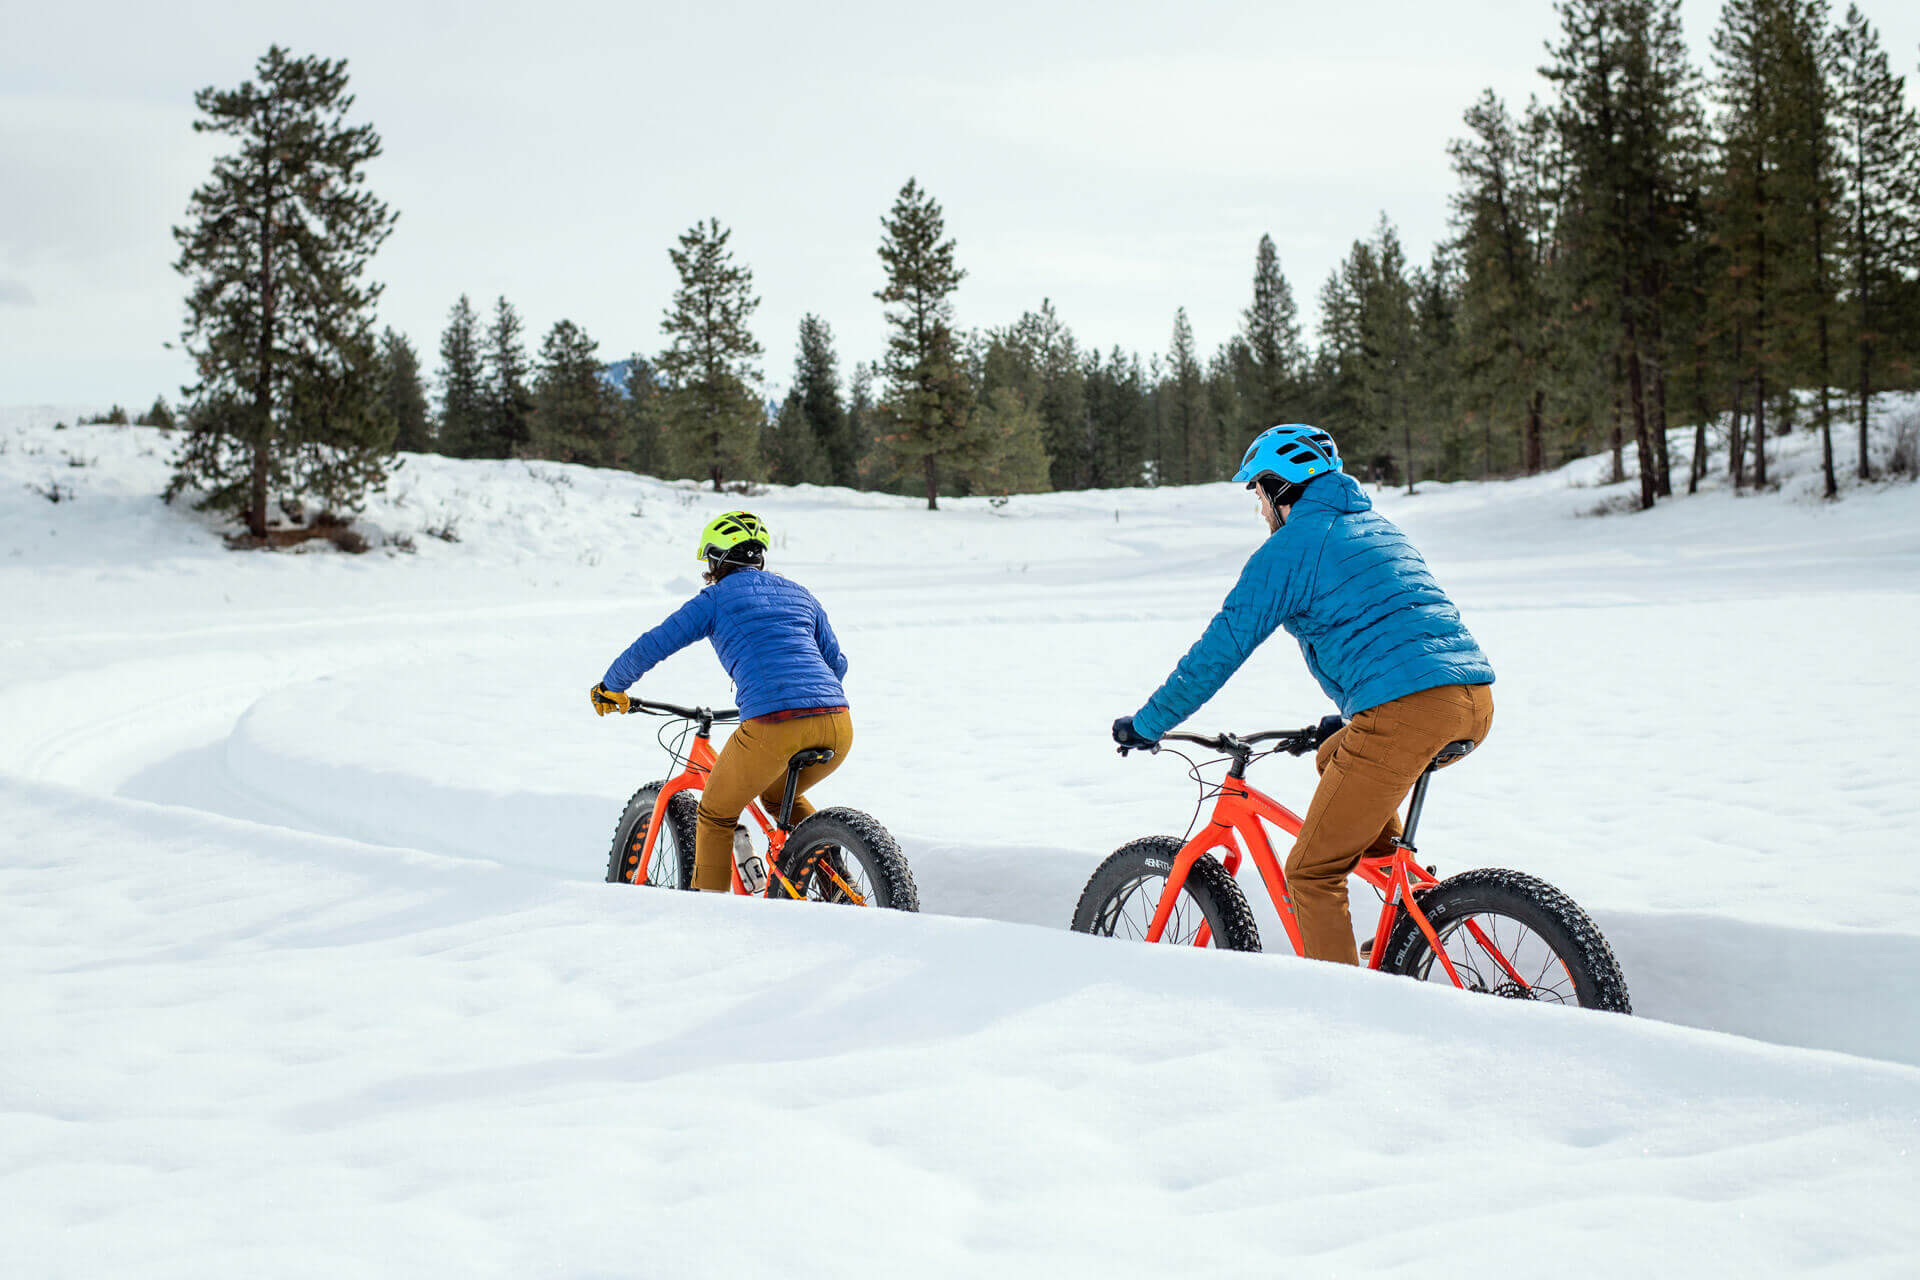 Two people ride along a snow-covered trail on fat-tire bikes